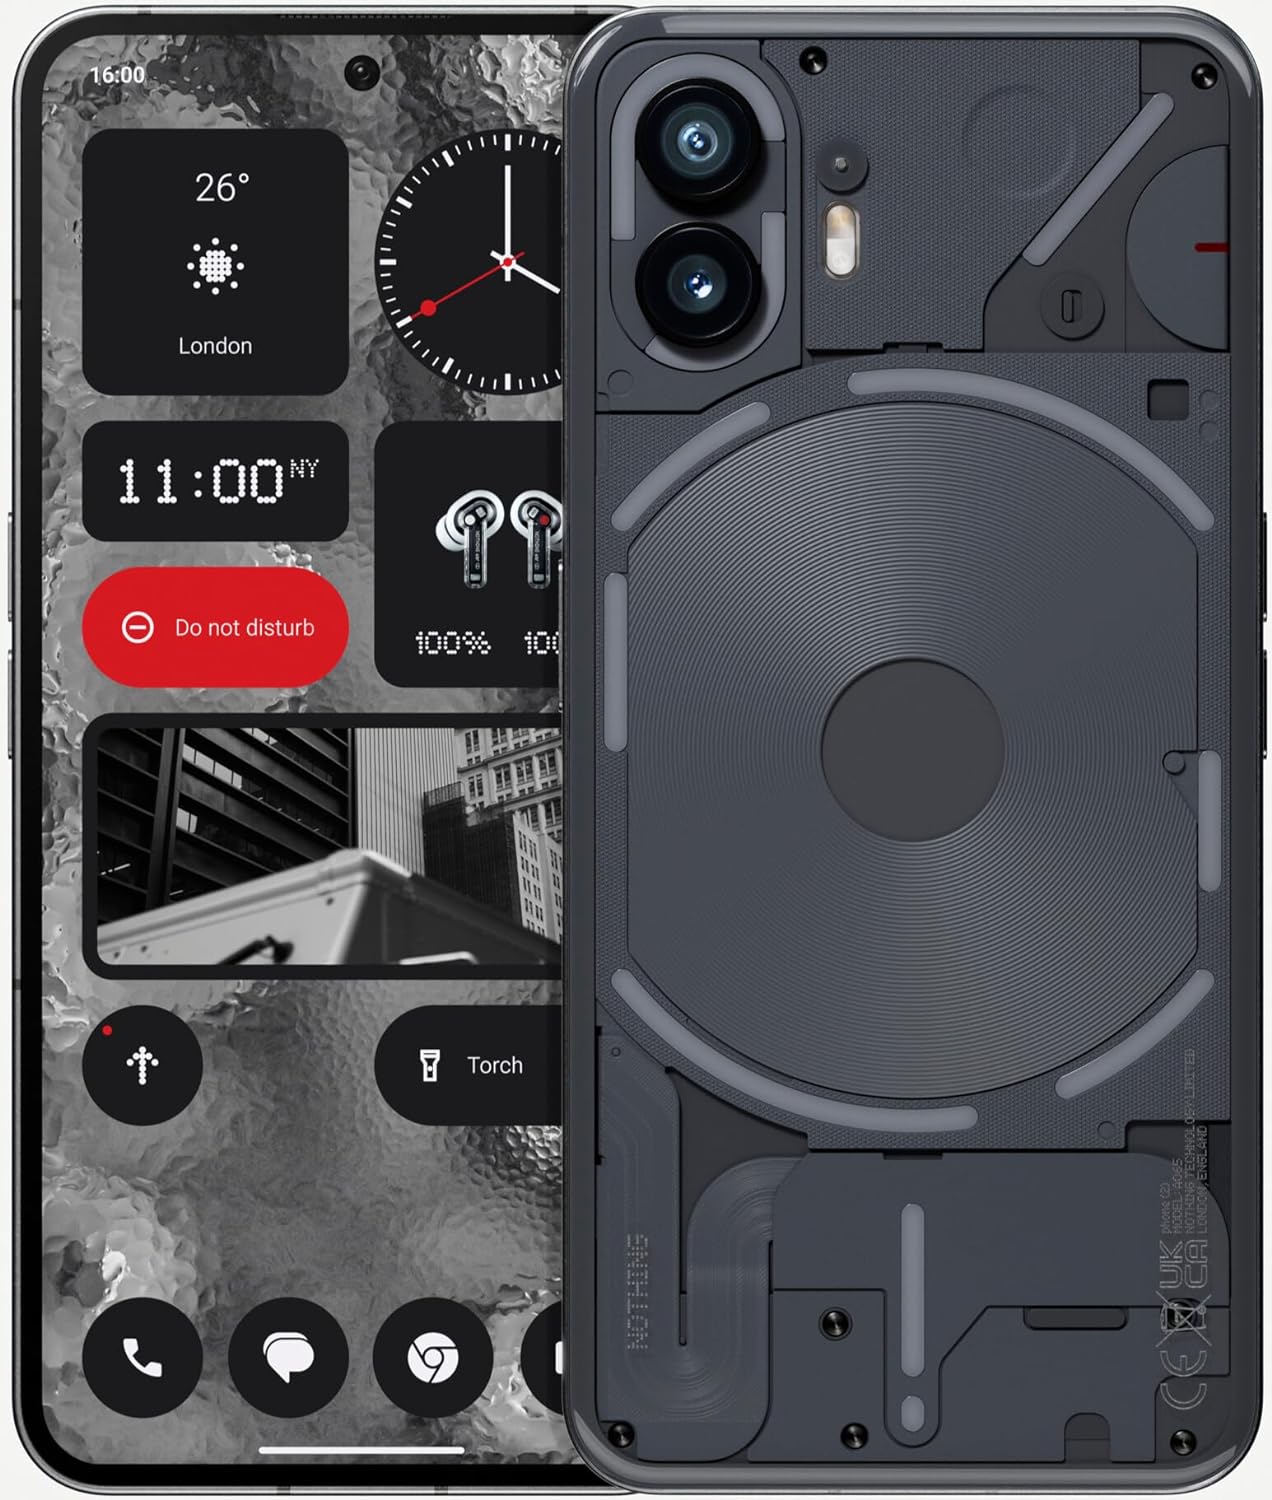 This image shows the nothing phone 2 with a graphical representation of its internal components superimposed onto the back cover. The design is aesthetic and not an actual view of the internals. The interface on the screen displays various widgets and icons that indicate it's likely a customized user interface. Widgets include the temperature in London, a clock showing 11:00 NY (likely New York time), a headphone battery level indicator.